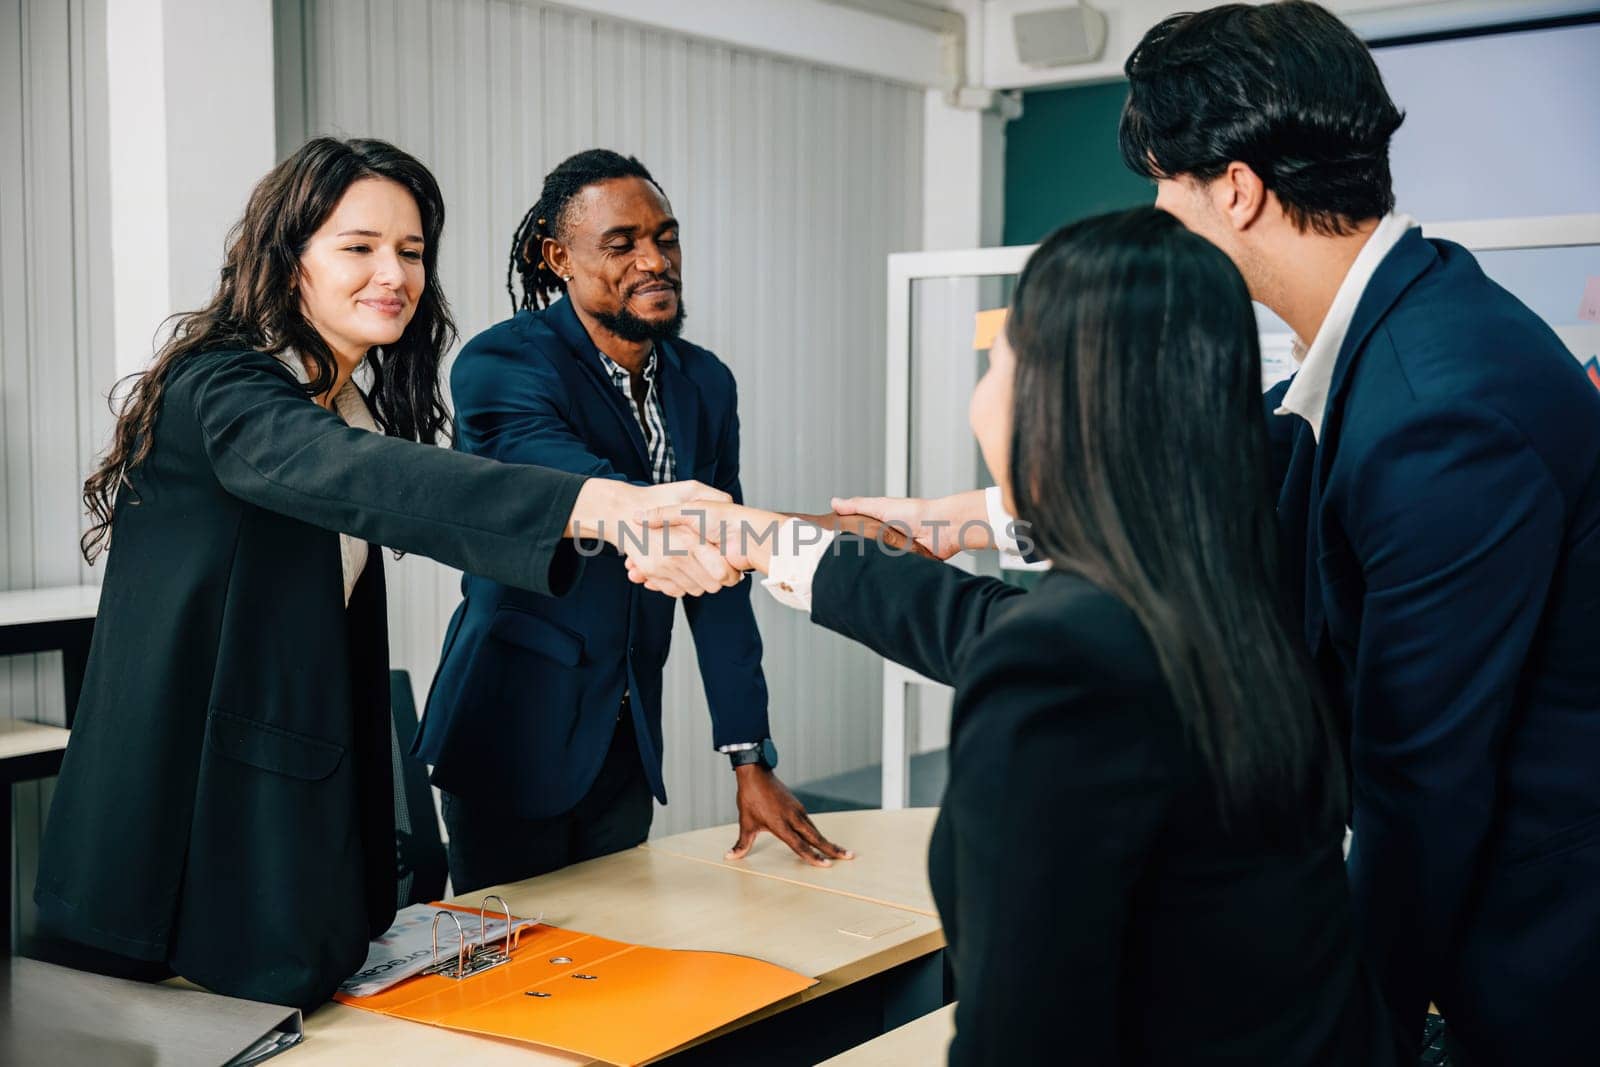 Professionals in an office seal a deal with a handshake, symbolizing success. Executives, lawyers, and managers collaborate to celebrate their partnership after a meeting. Teamwork